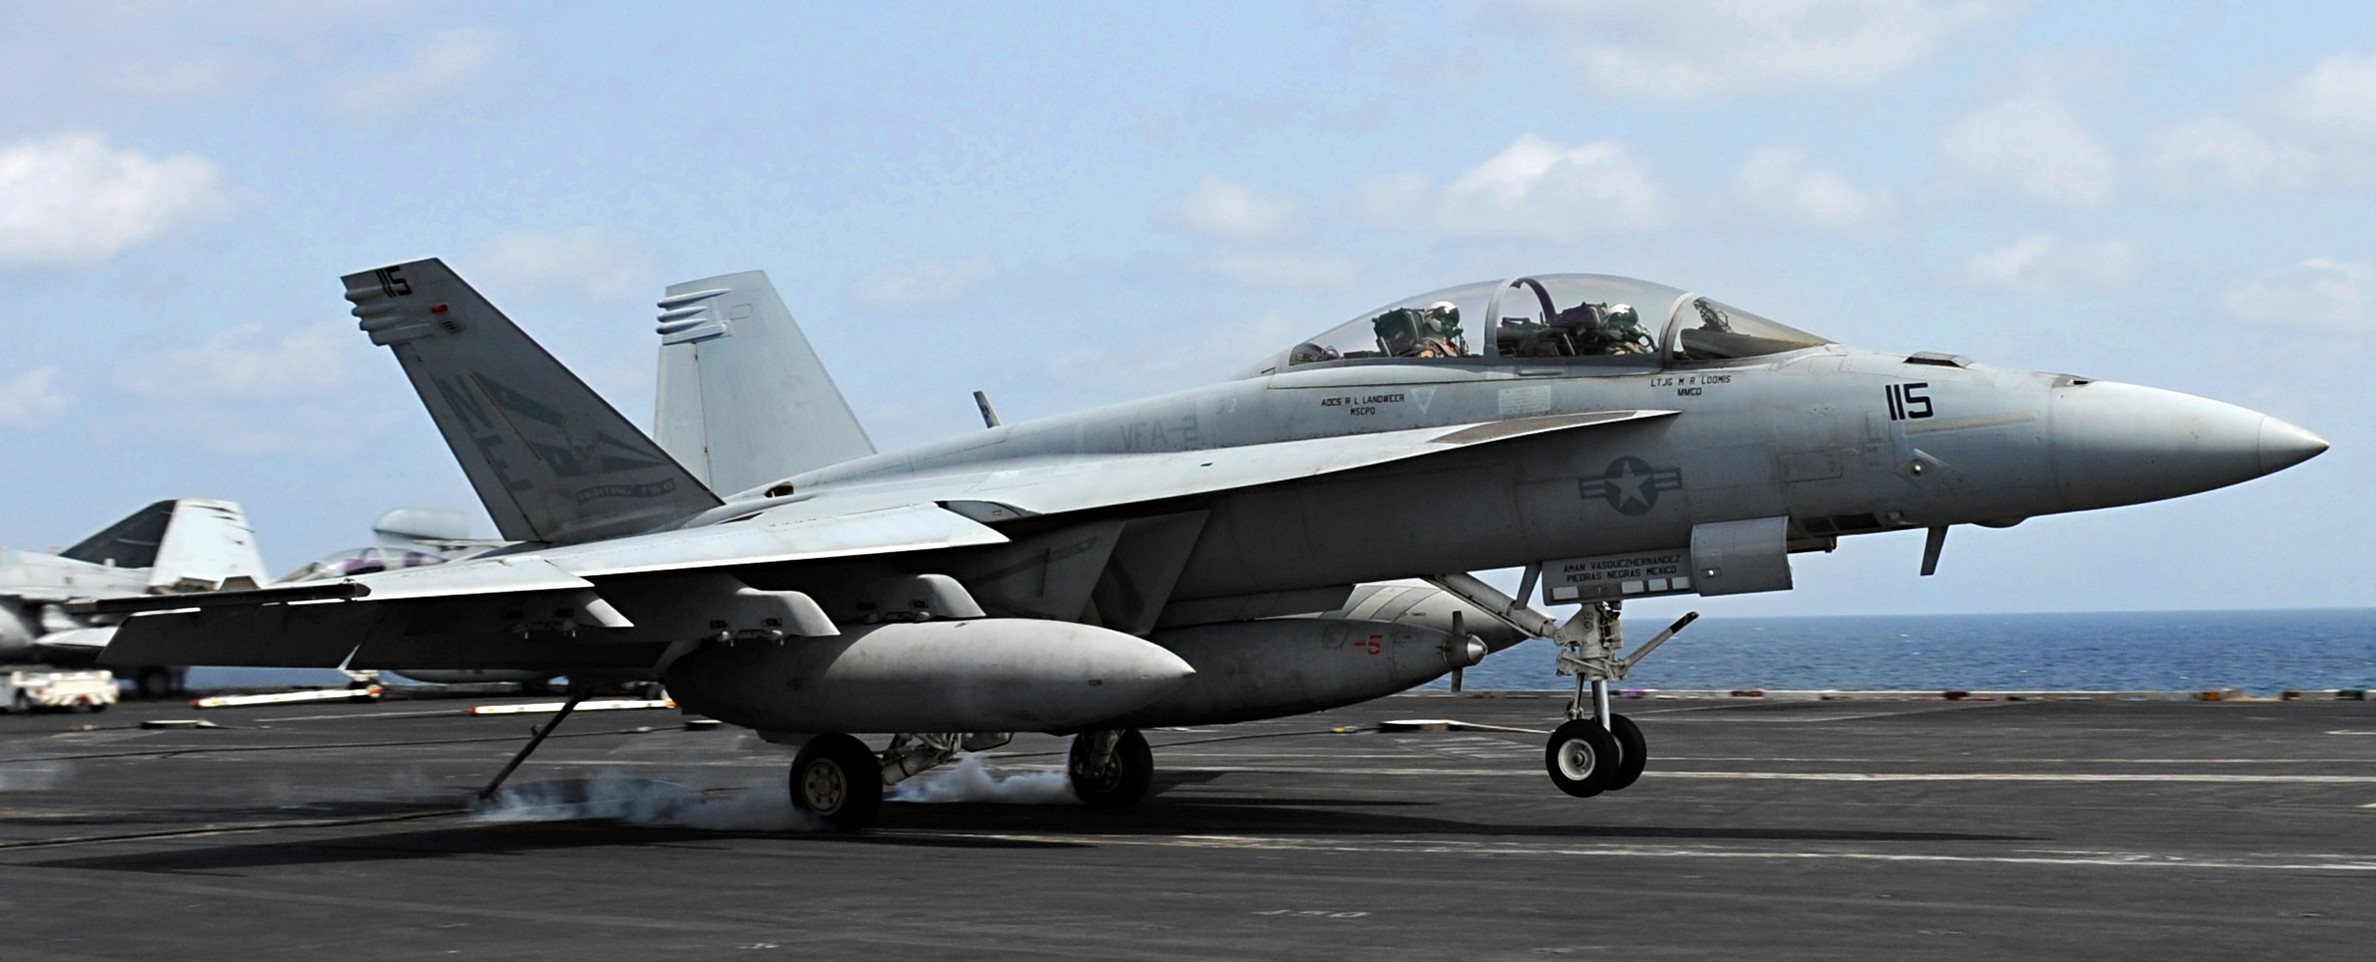 vfa-2 bounty hunters strike fighter squadron us navy f/a-18f super hornet carrier air wing cvw-2 uss abraham lincoln cvn-72 50